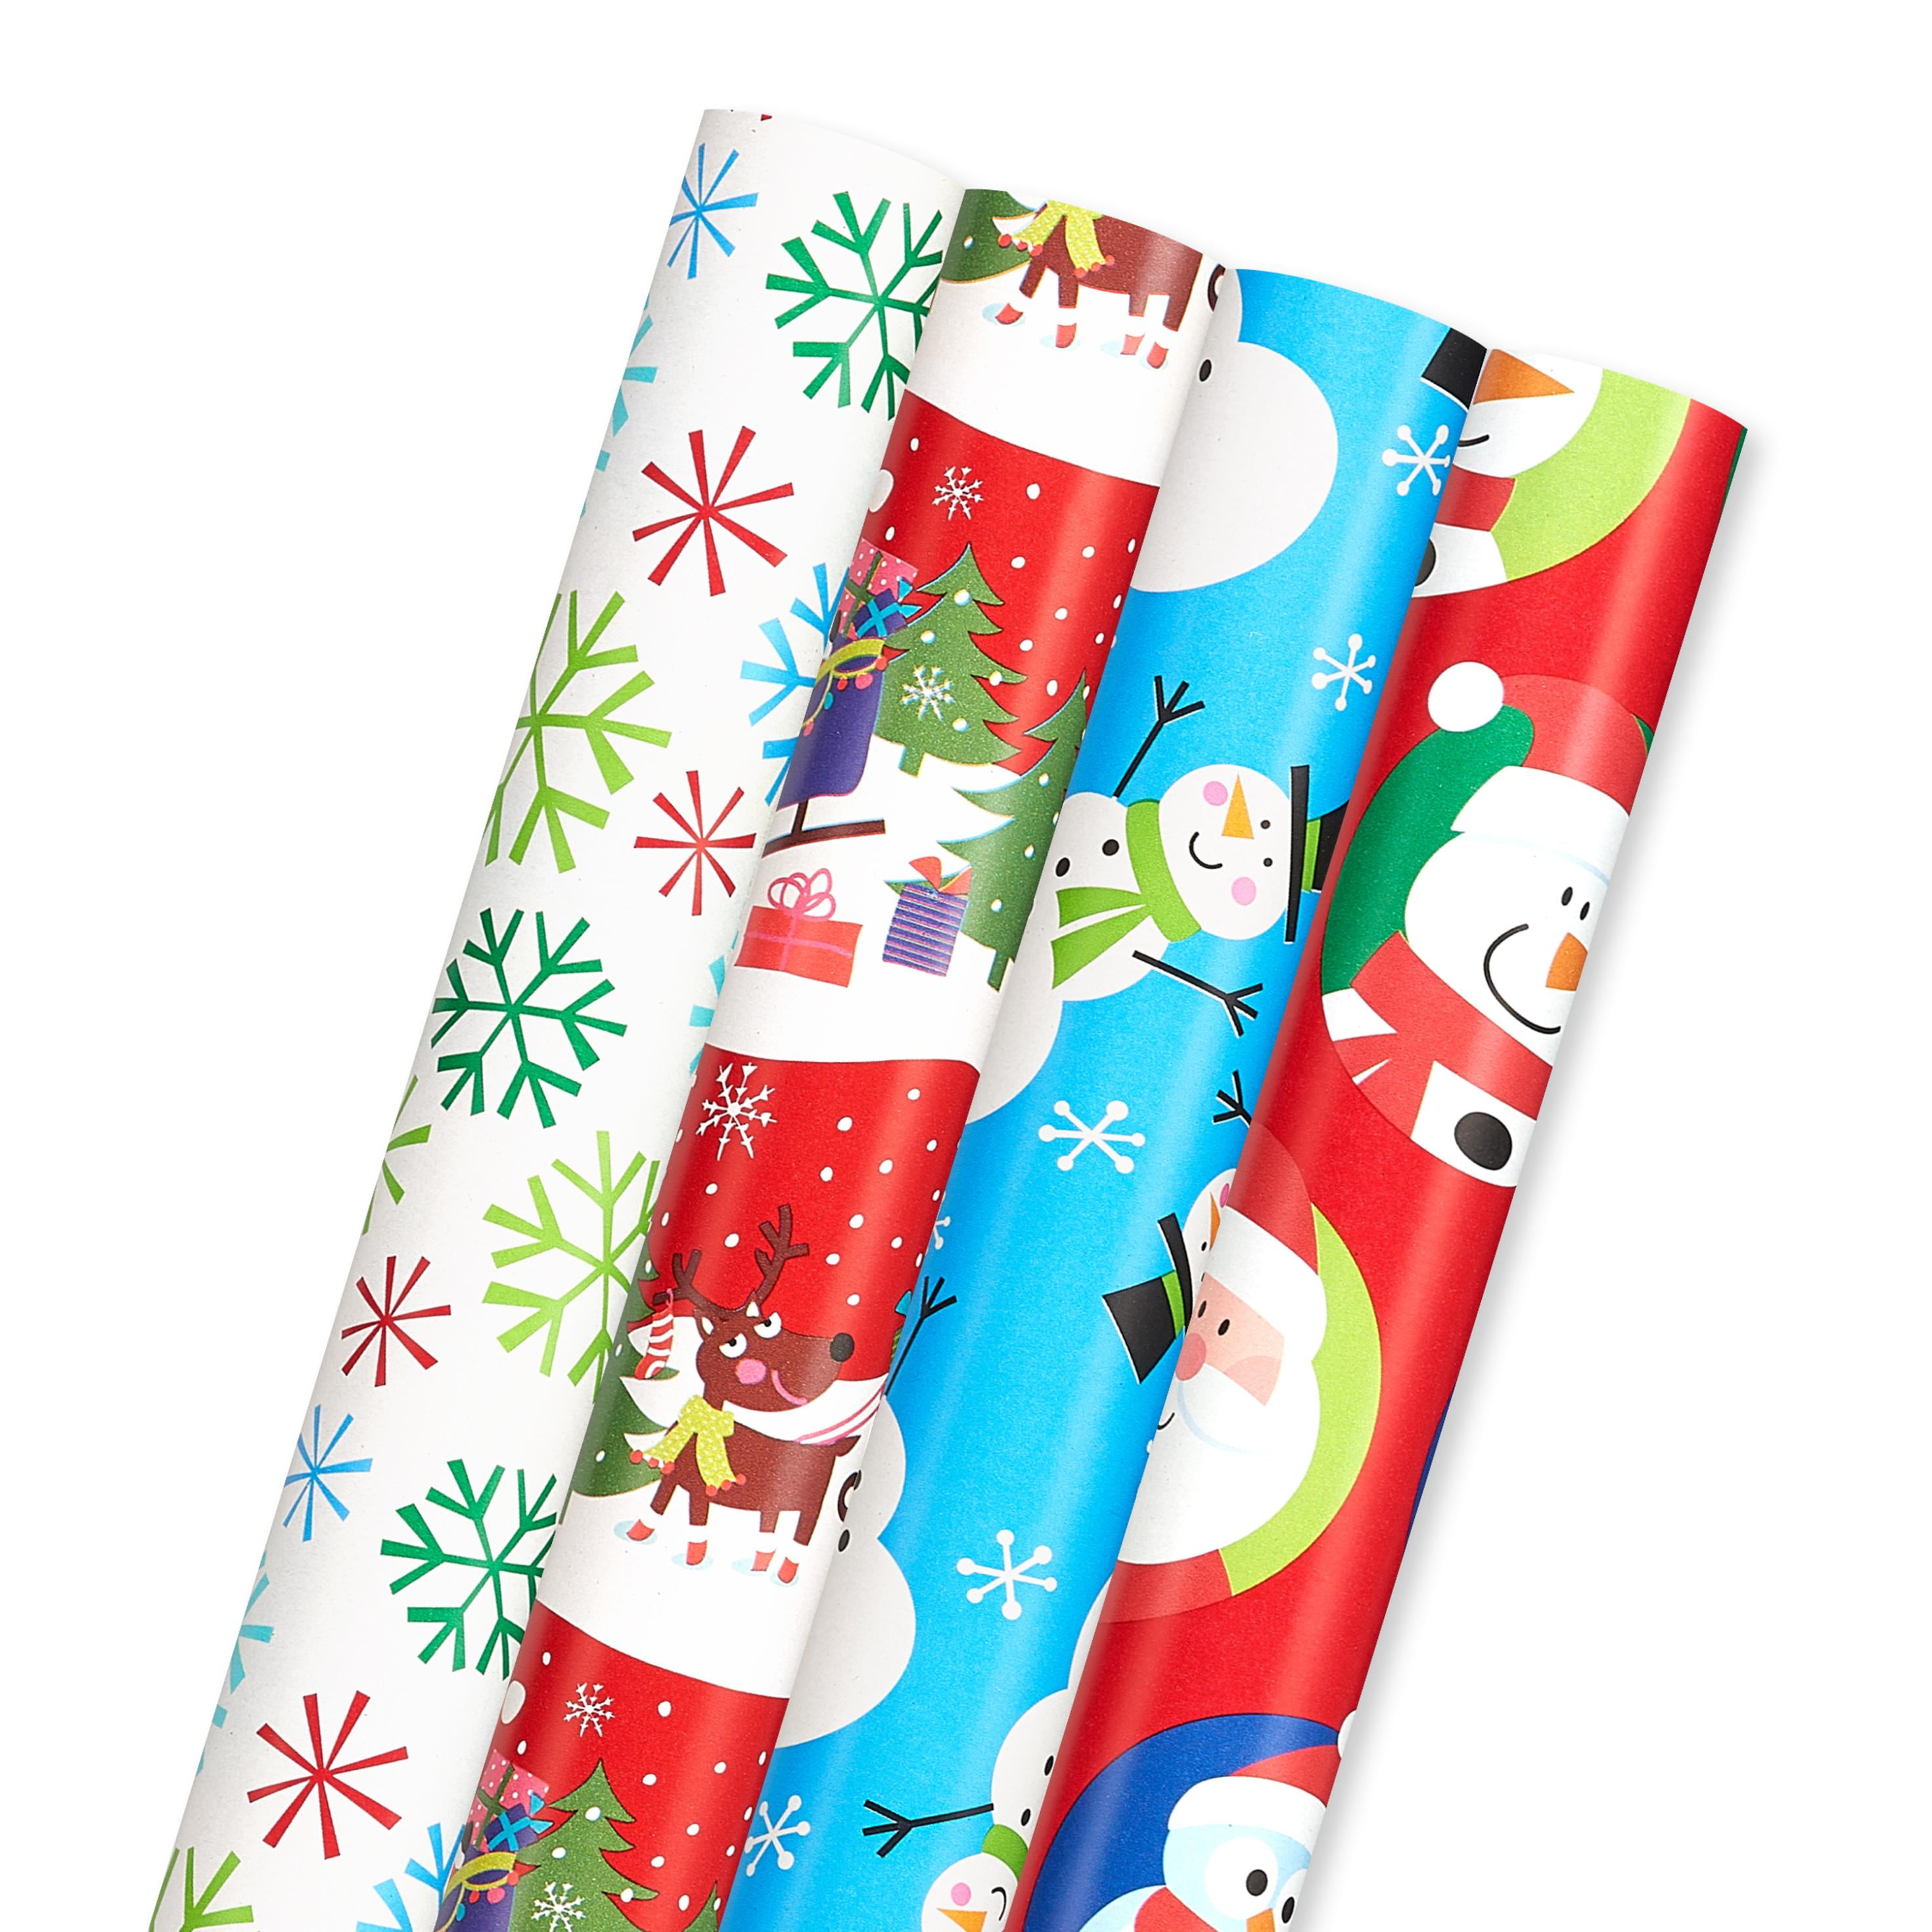 4 x 10m Christmas Wrapping Paper Rolls - Kids  Snowman/Santa/Penguin/Reindeer by Swoosh Supplies : :  Stationery & Office Supplies